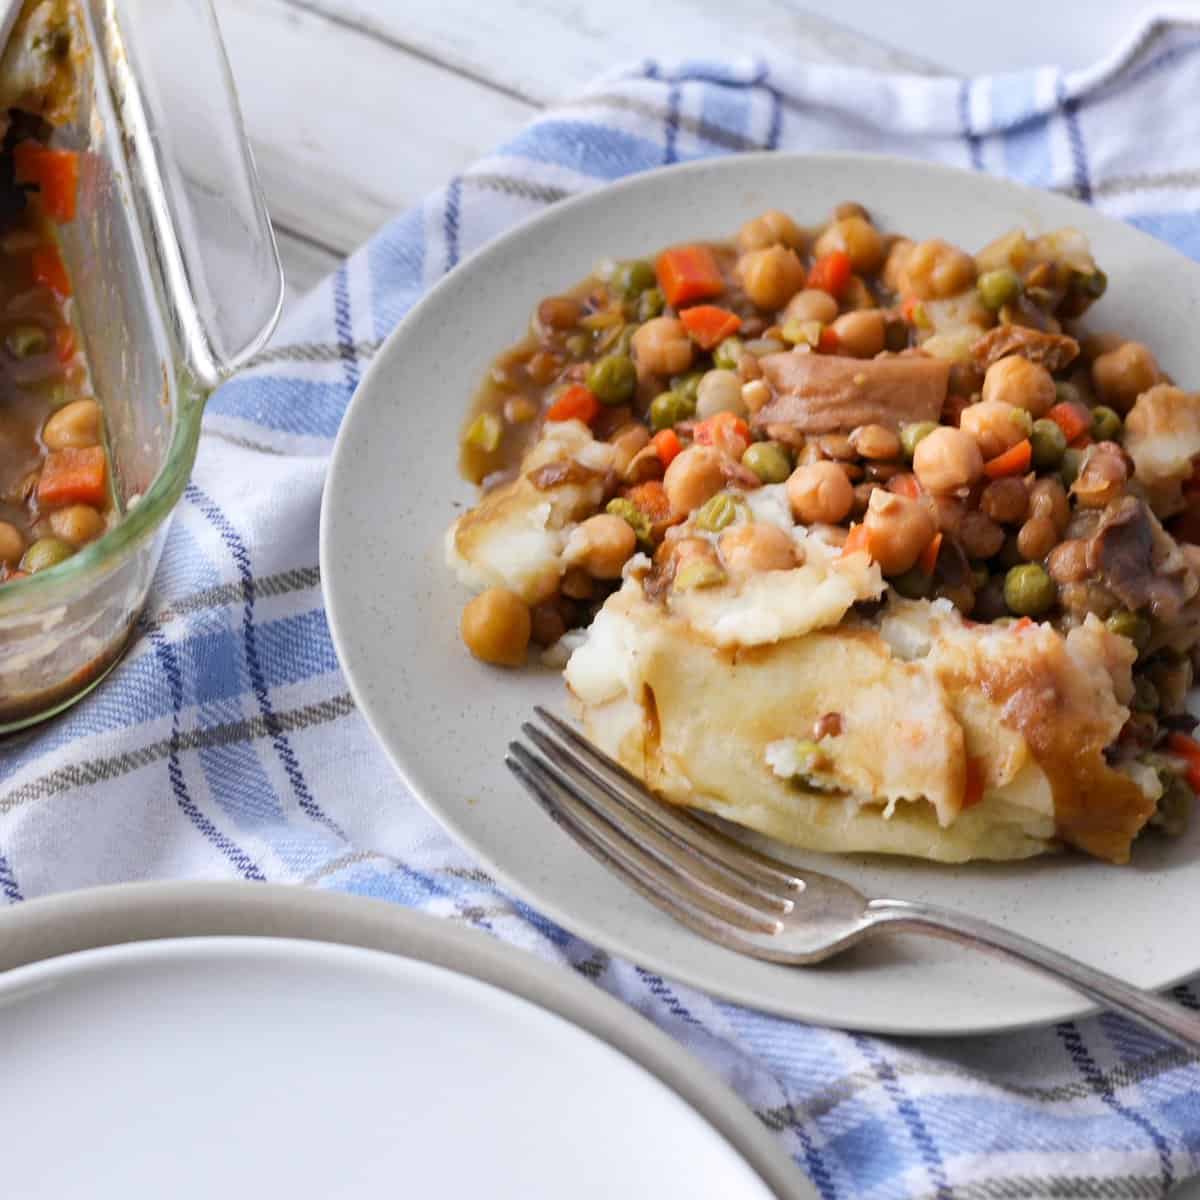 A straight view of the vegan shepherd’s pie with lentils placed on a plate.